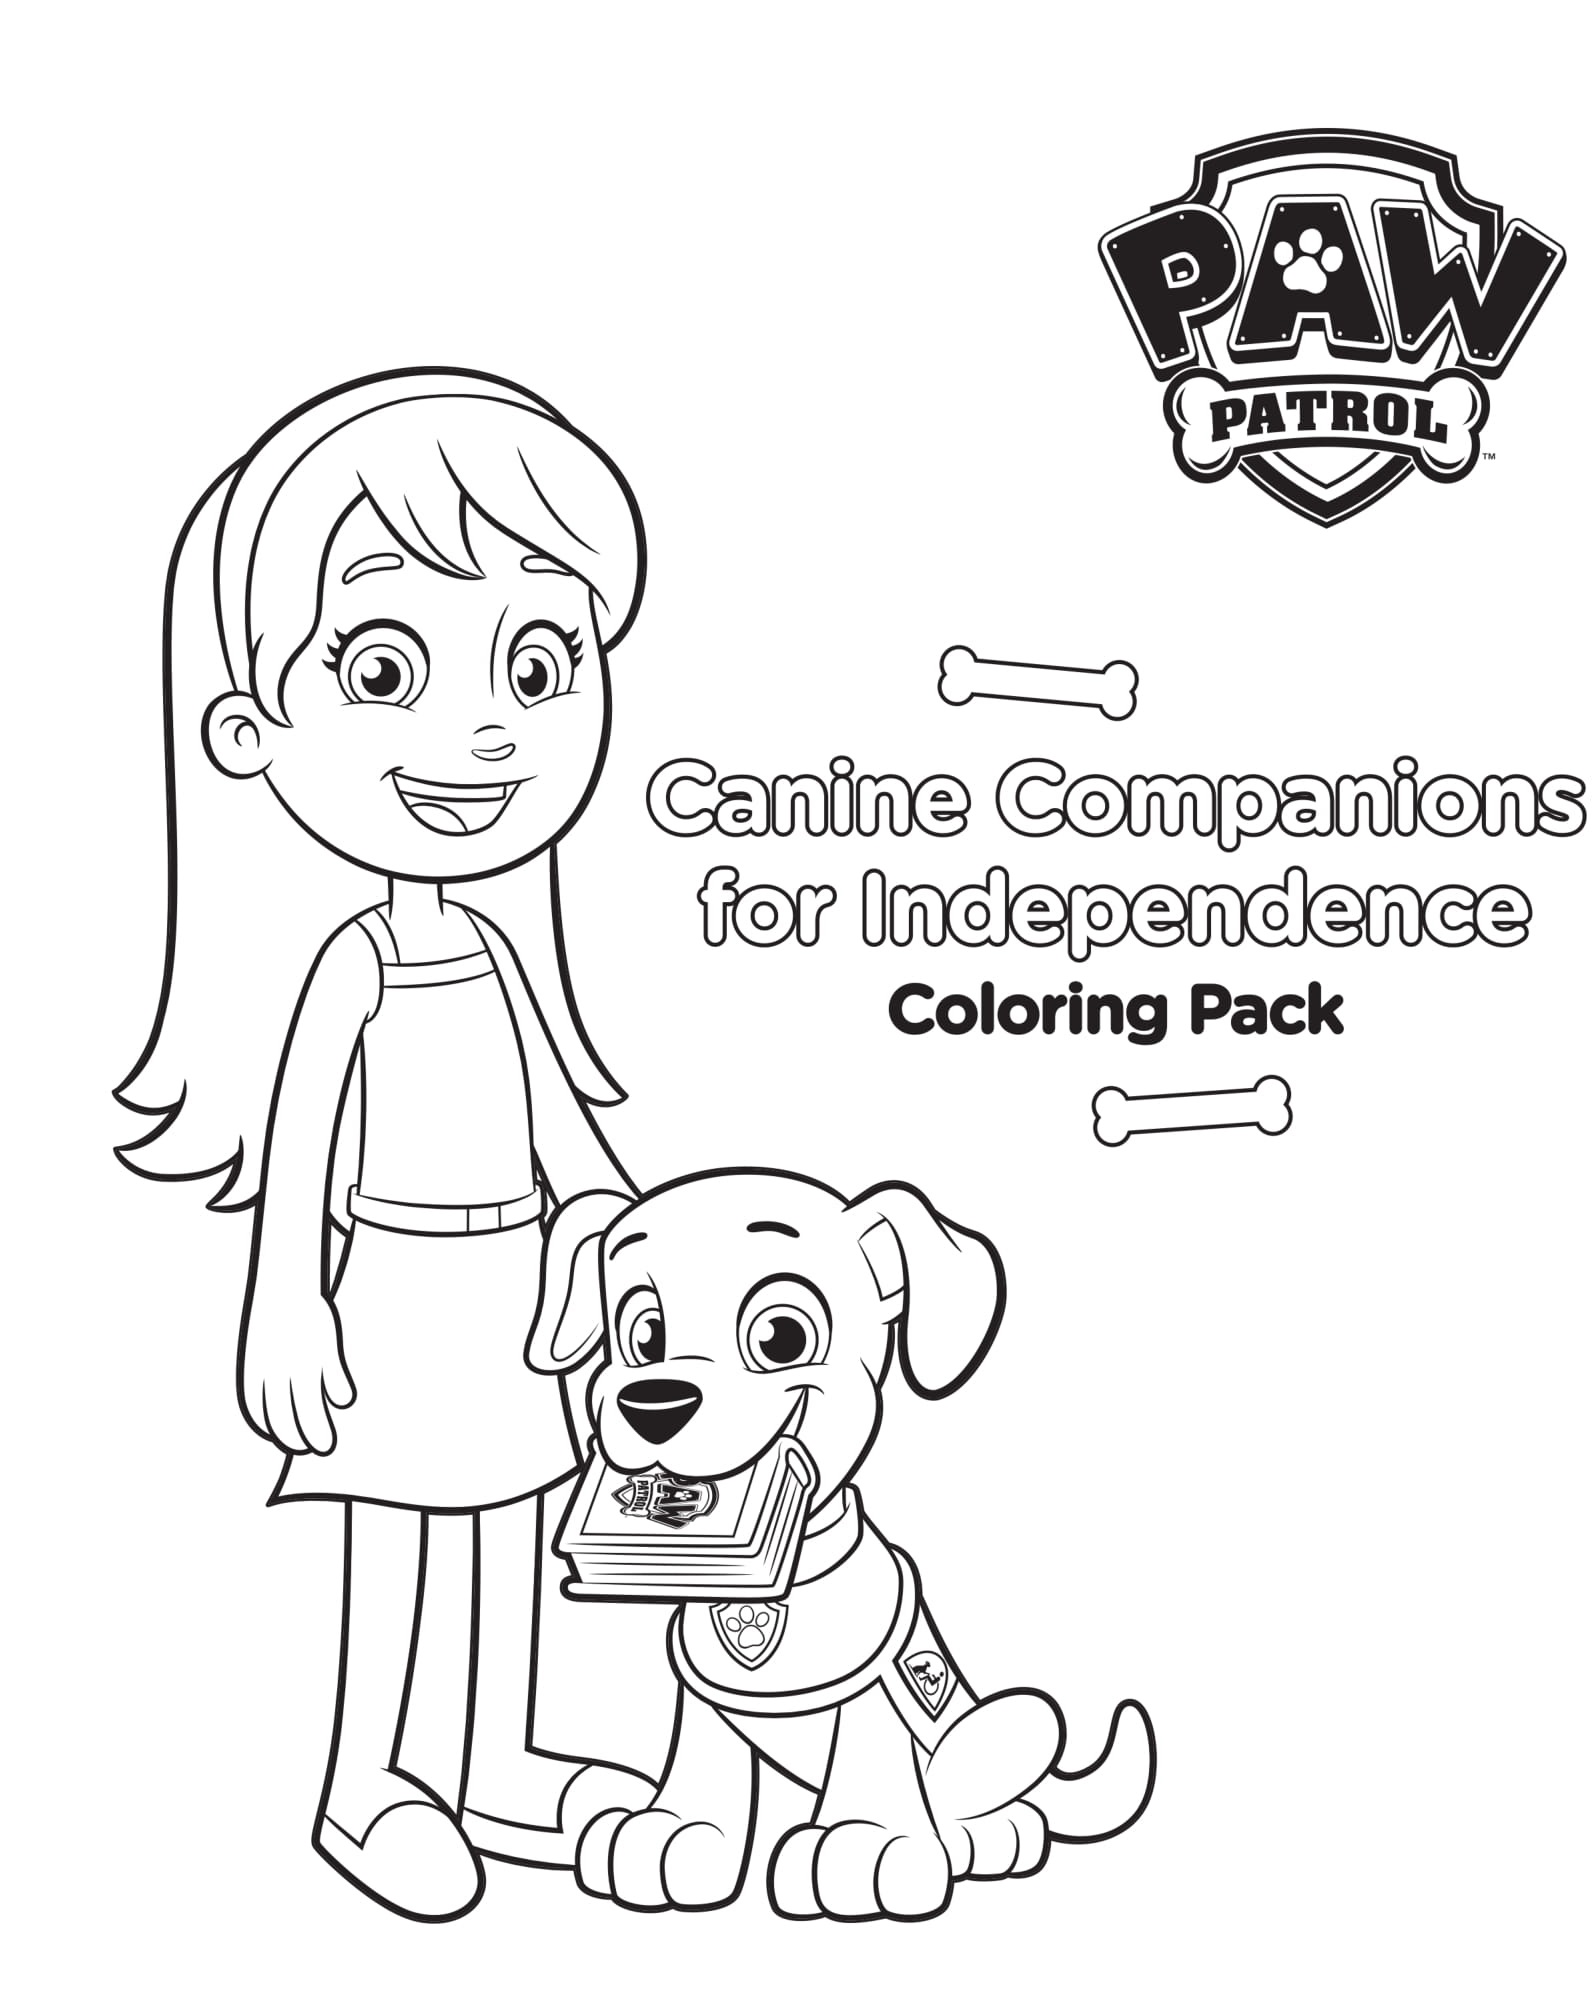 Canine Companions For Independence Coloring Page